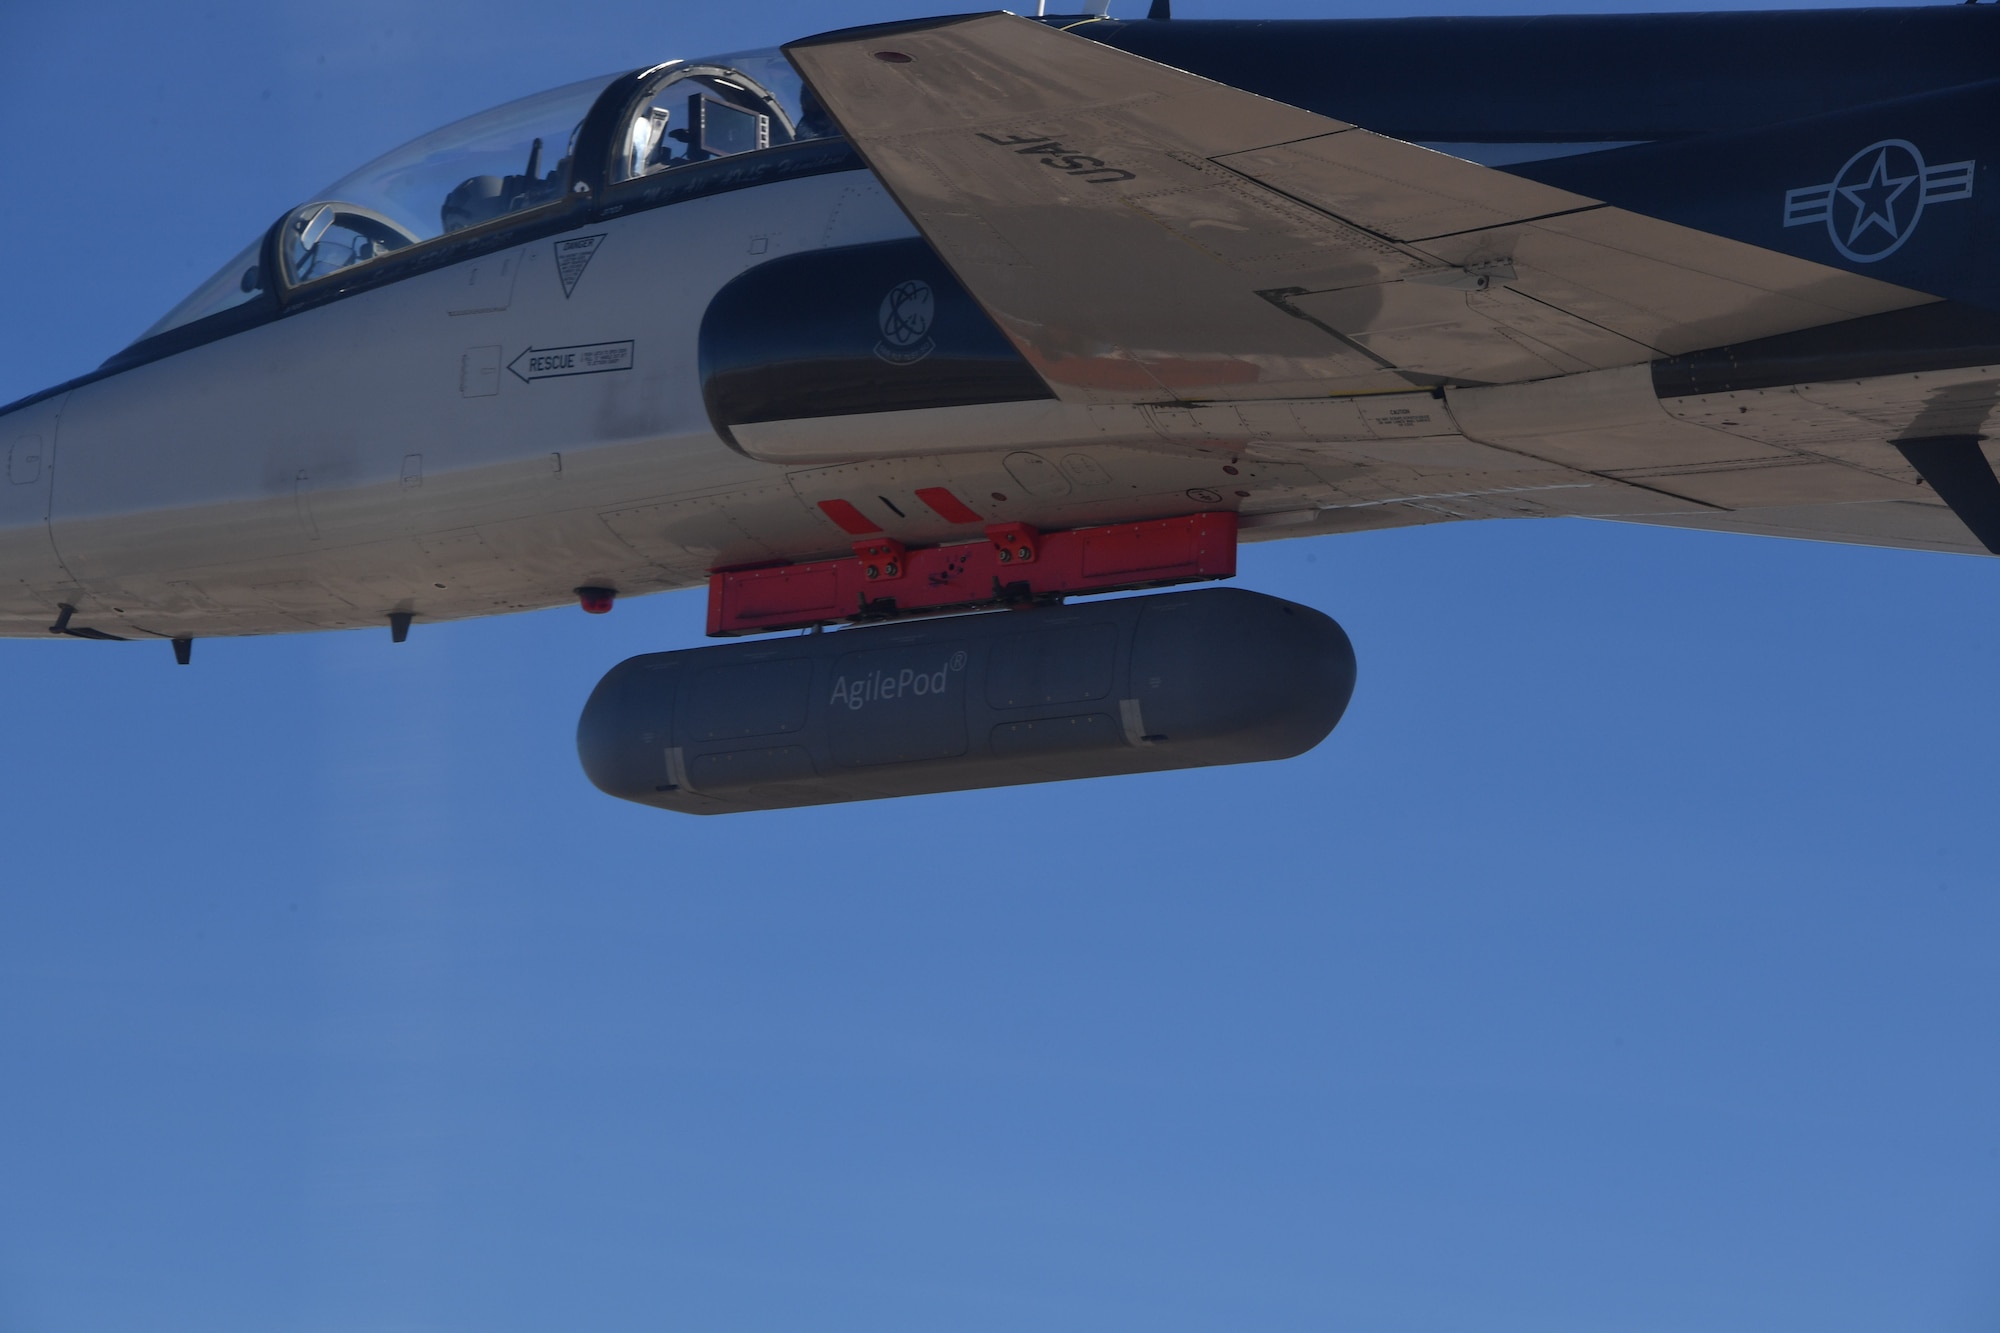 A PNT AgilePod attached to a T-38C successfully demonstrated fully-remote interfacing and alt-PNT data transmission, and performance over both land and water during flight tests November 1-10. (U.S. Air Force photo/2nd Lt. Bowen Lin, 586th Flight Test Squadron)